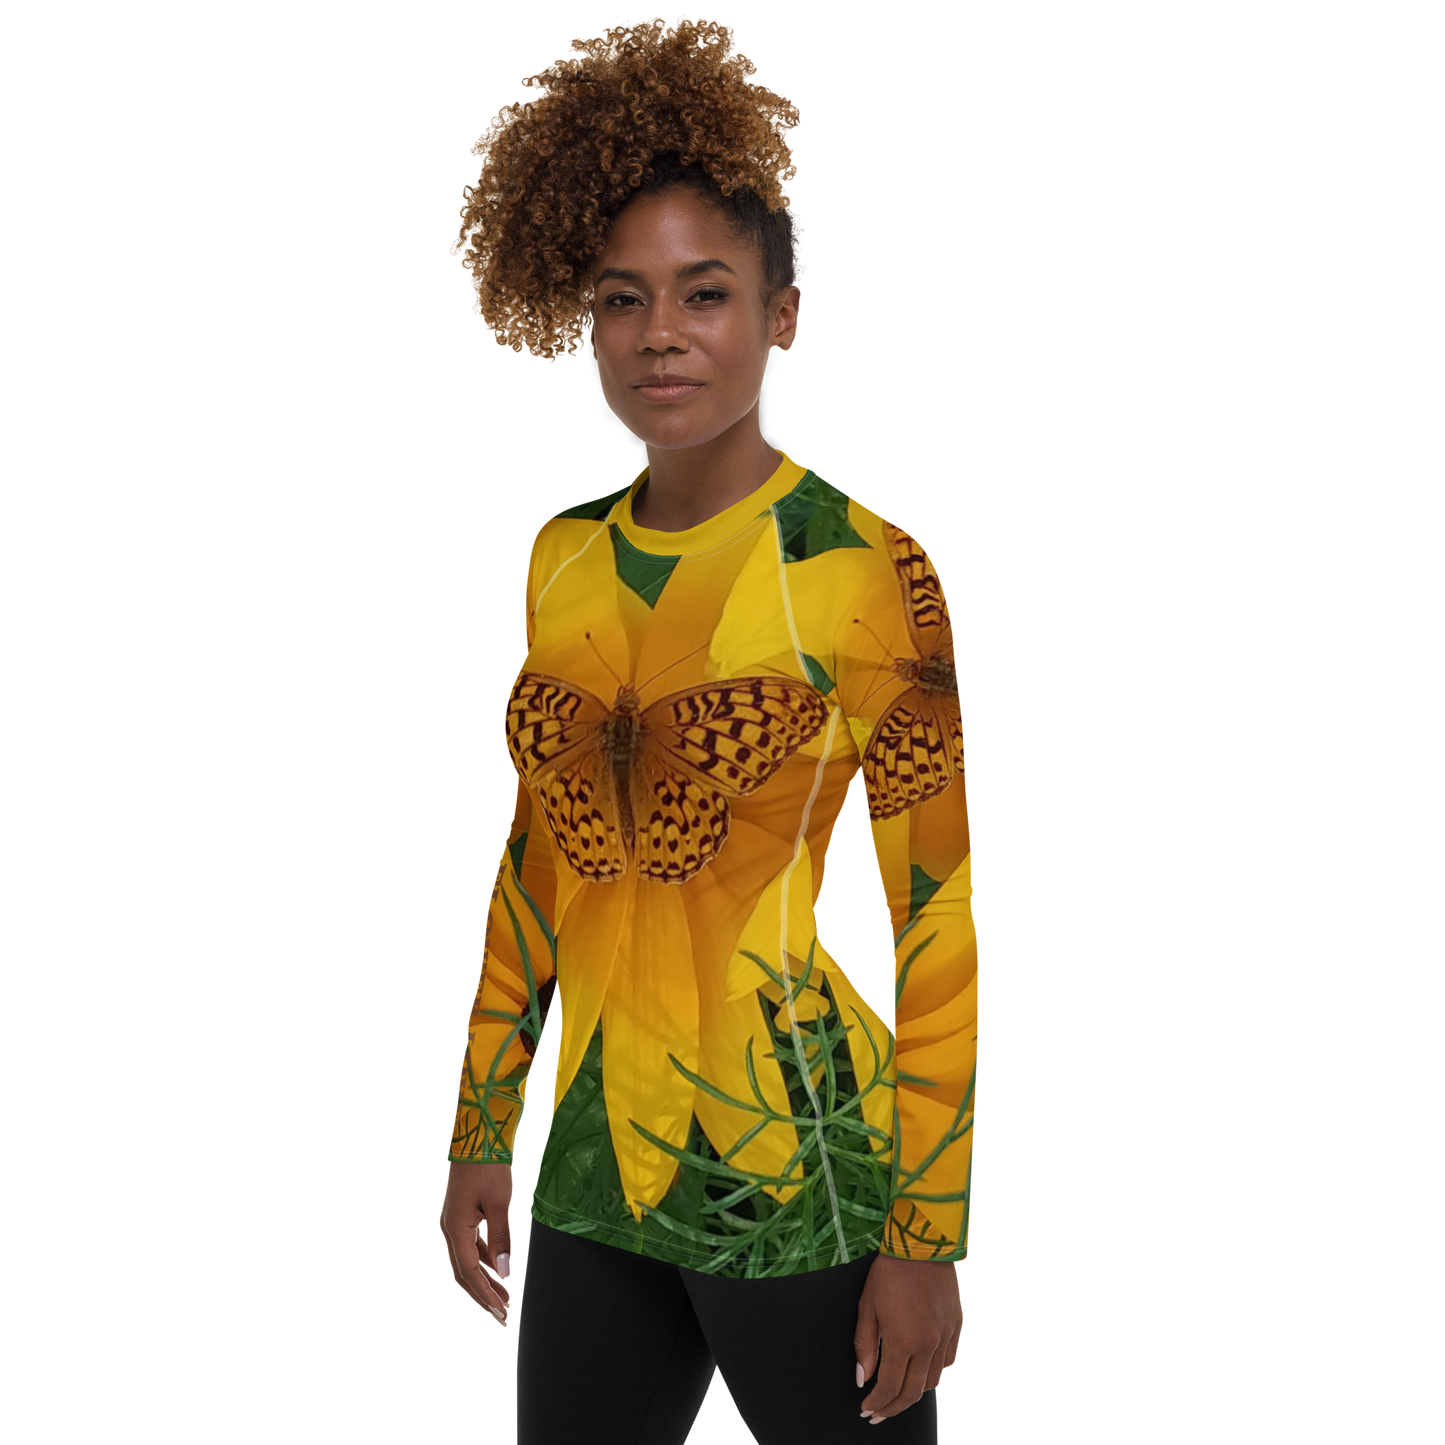 The FLOWER LOVE Collection - "Butterfly Beauty" Design Luxurious Women's Rash Guard, Sun Protective Clothing, Sports & Fitness Clothing